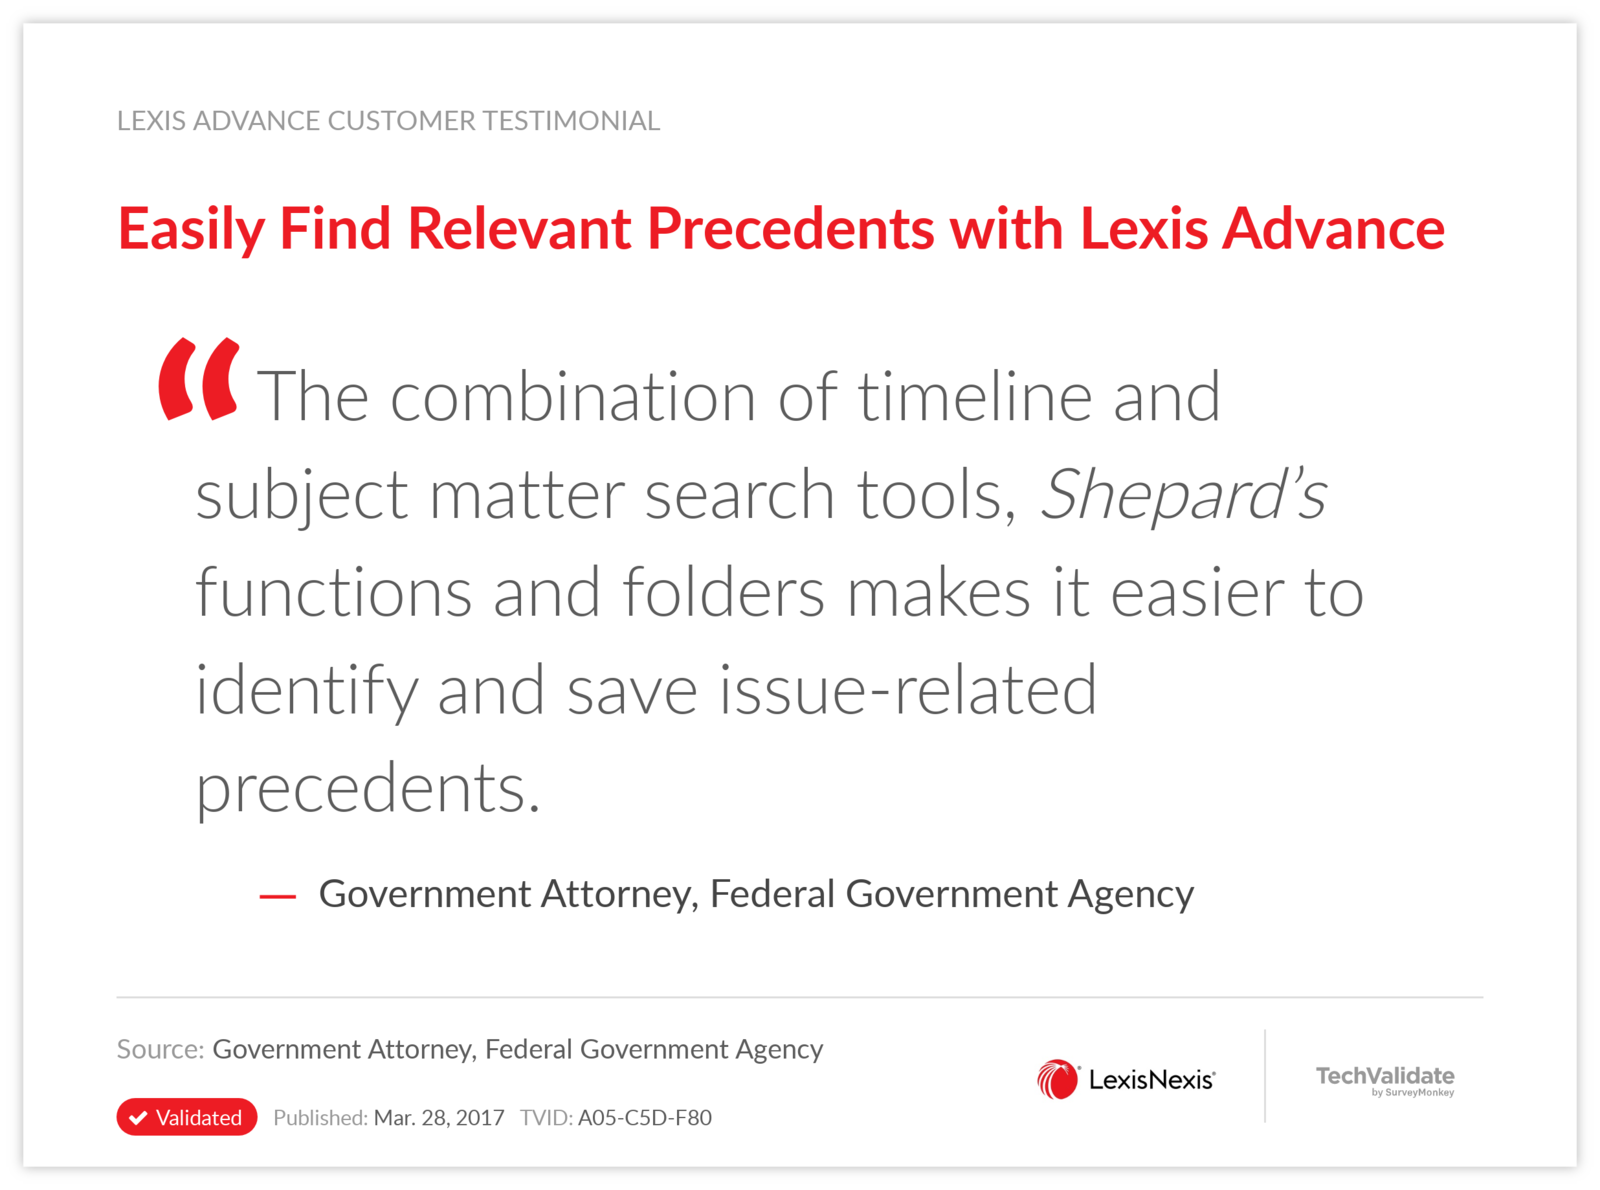 Easily Find Relevant Precedents with Lexis Advance